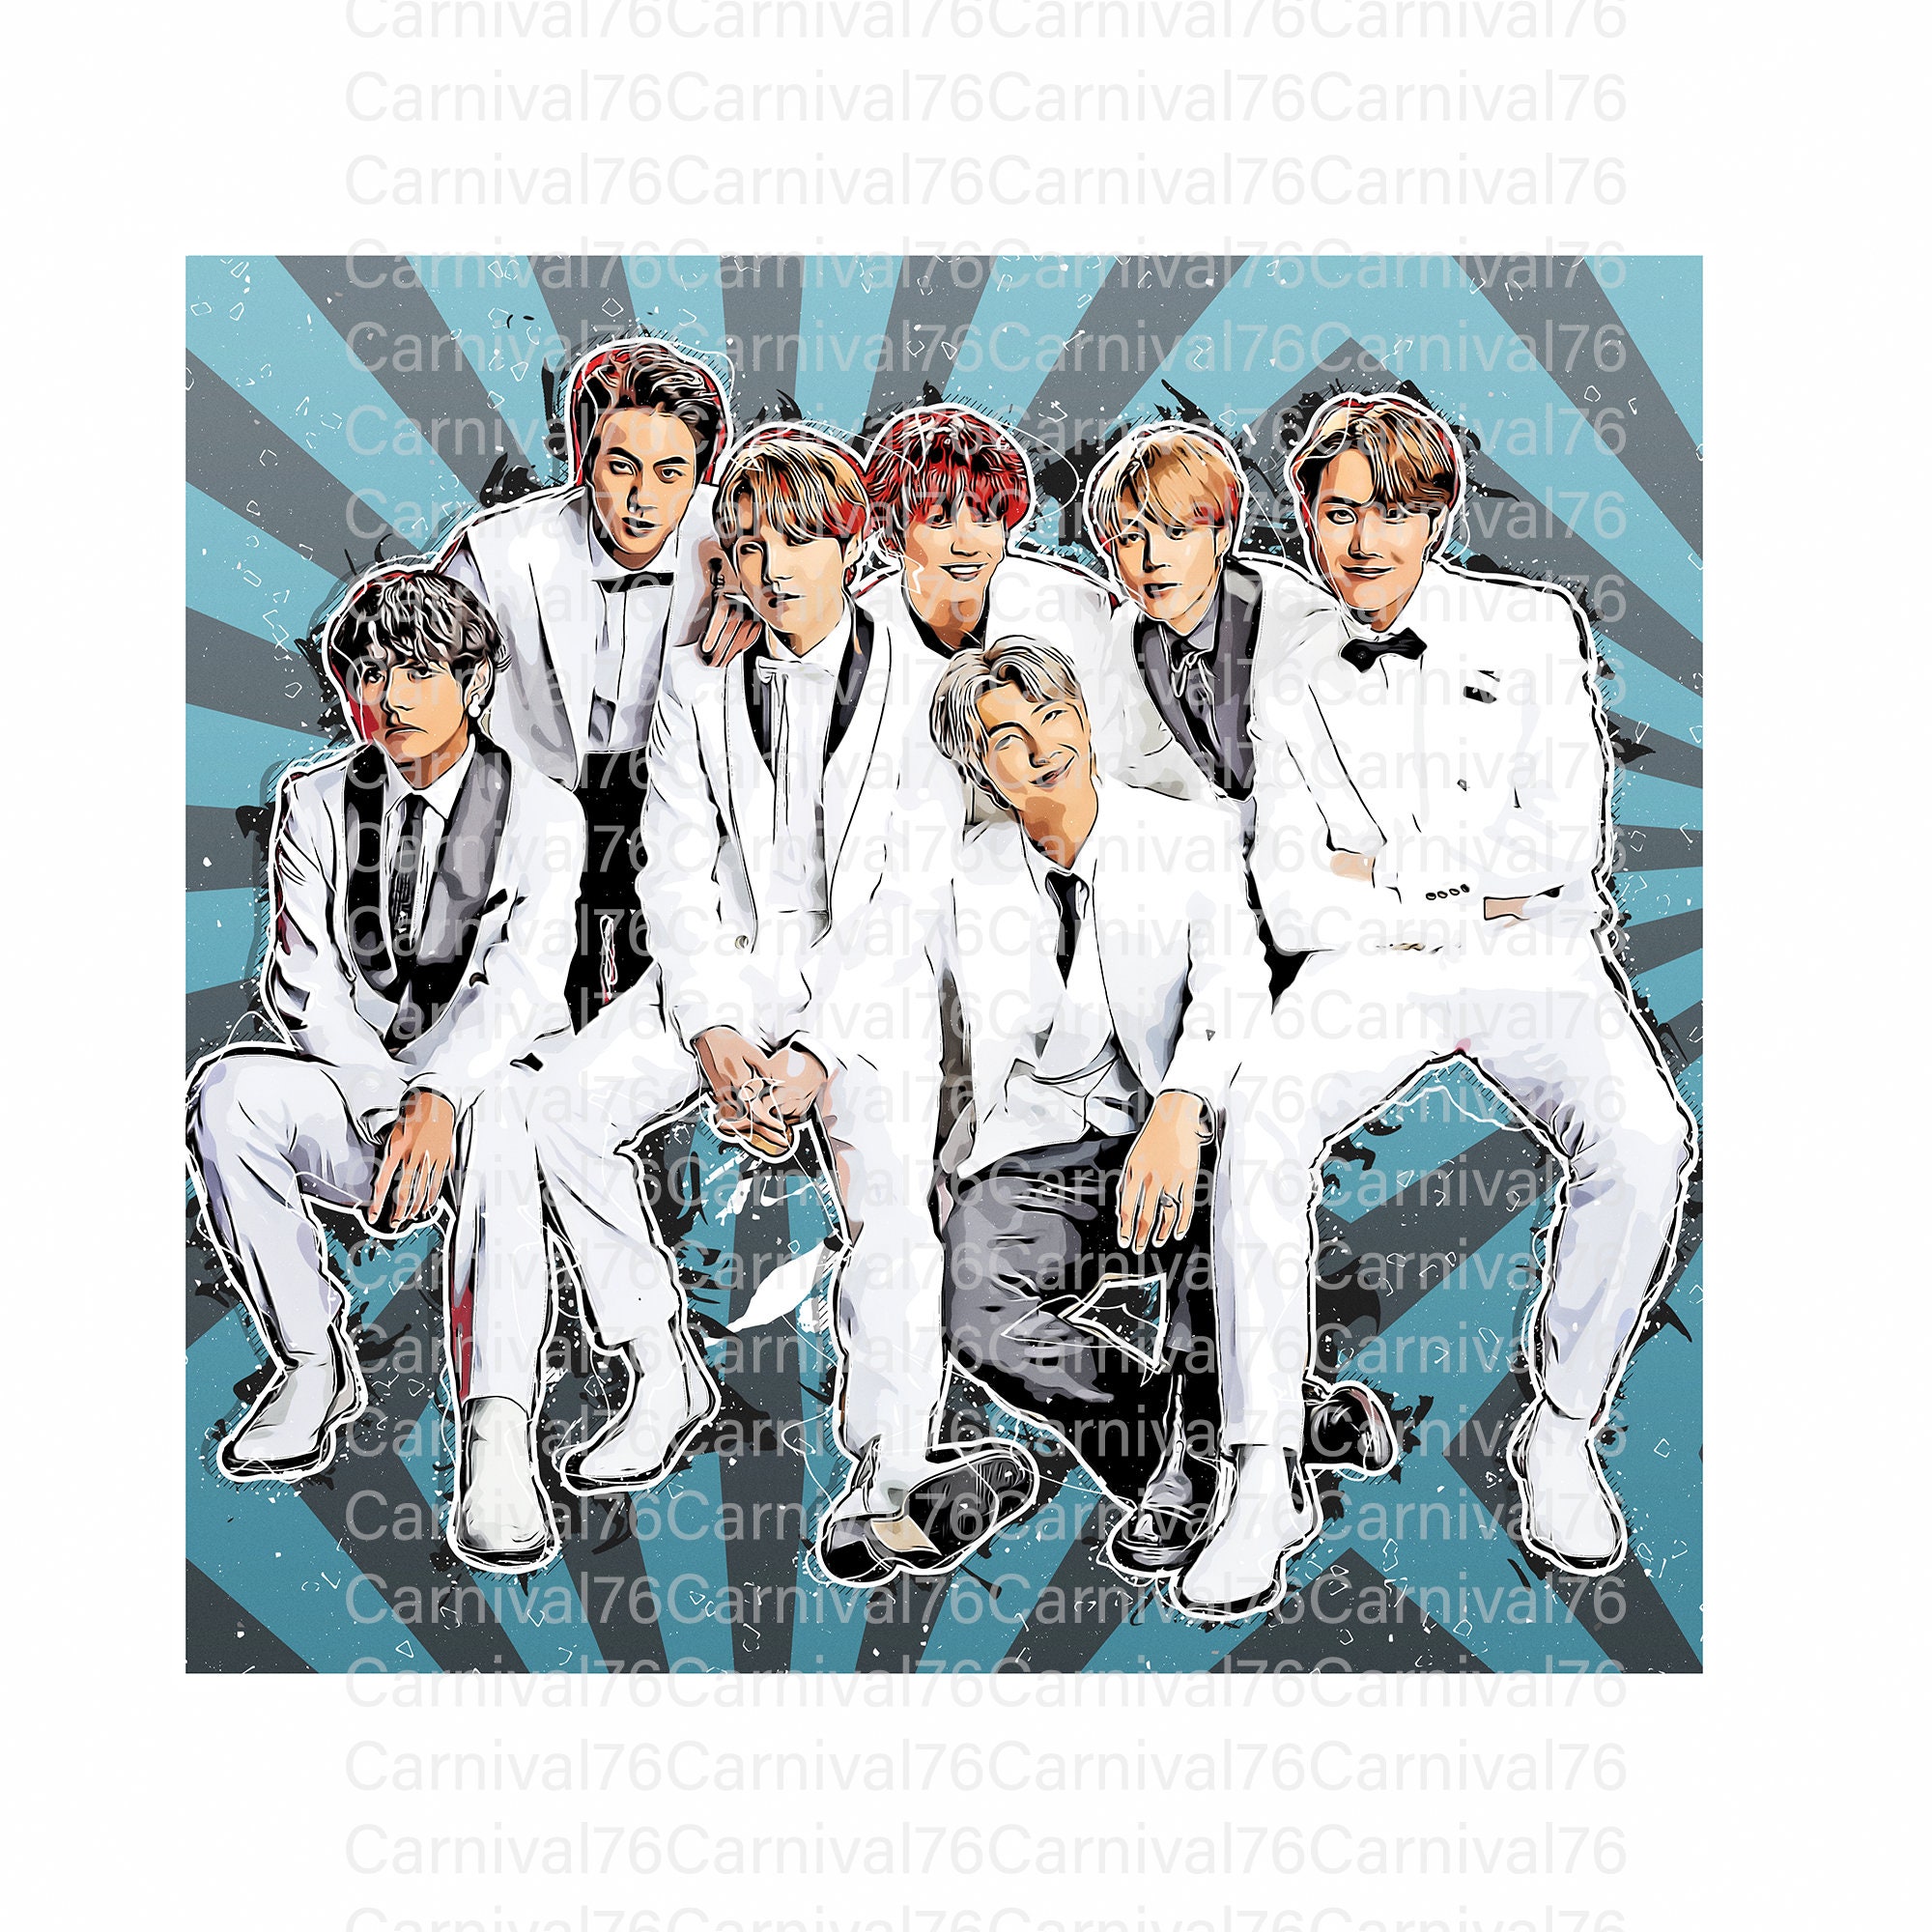 BTS Stickers • The Printables